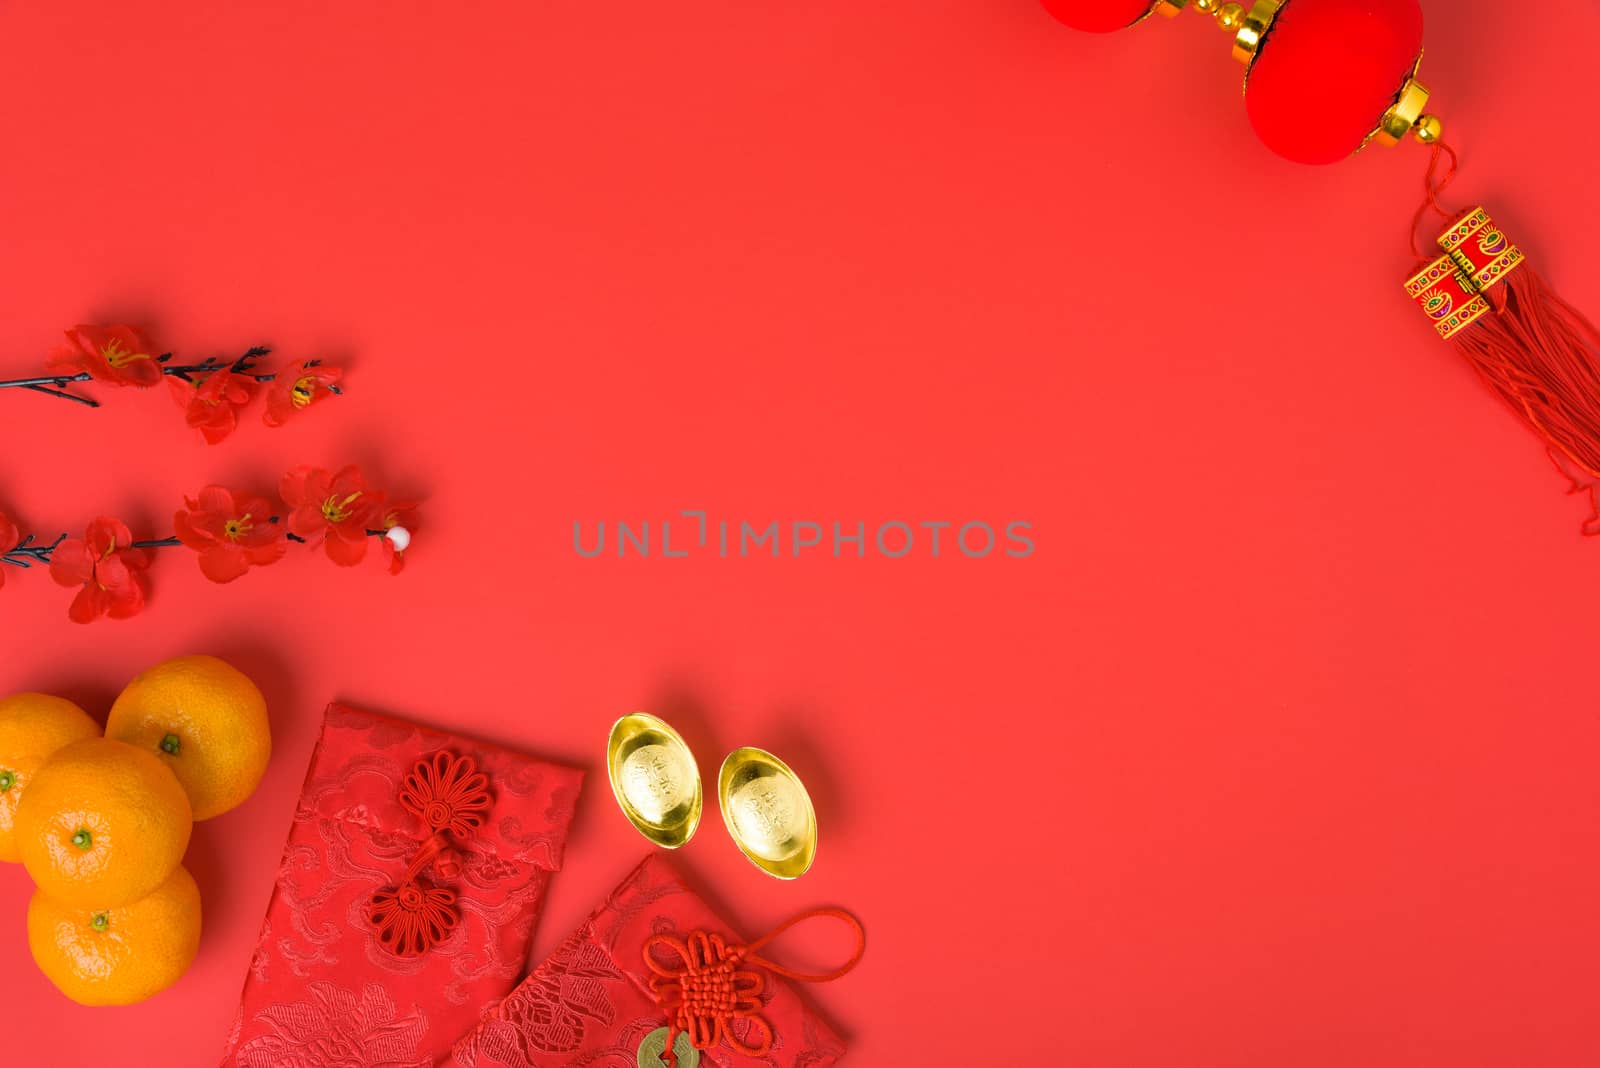 Chinese new year festival concept, flat lay top view, Happy Chinese new year with Red envelope and gold ingot (Character "FU" means fortune, blessing) on red background with copy space for text